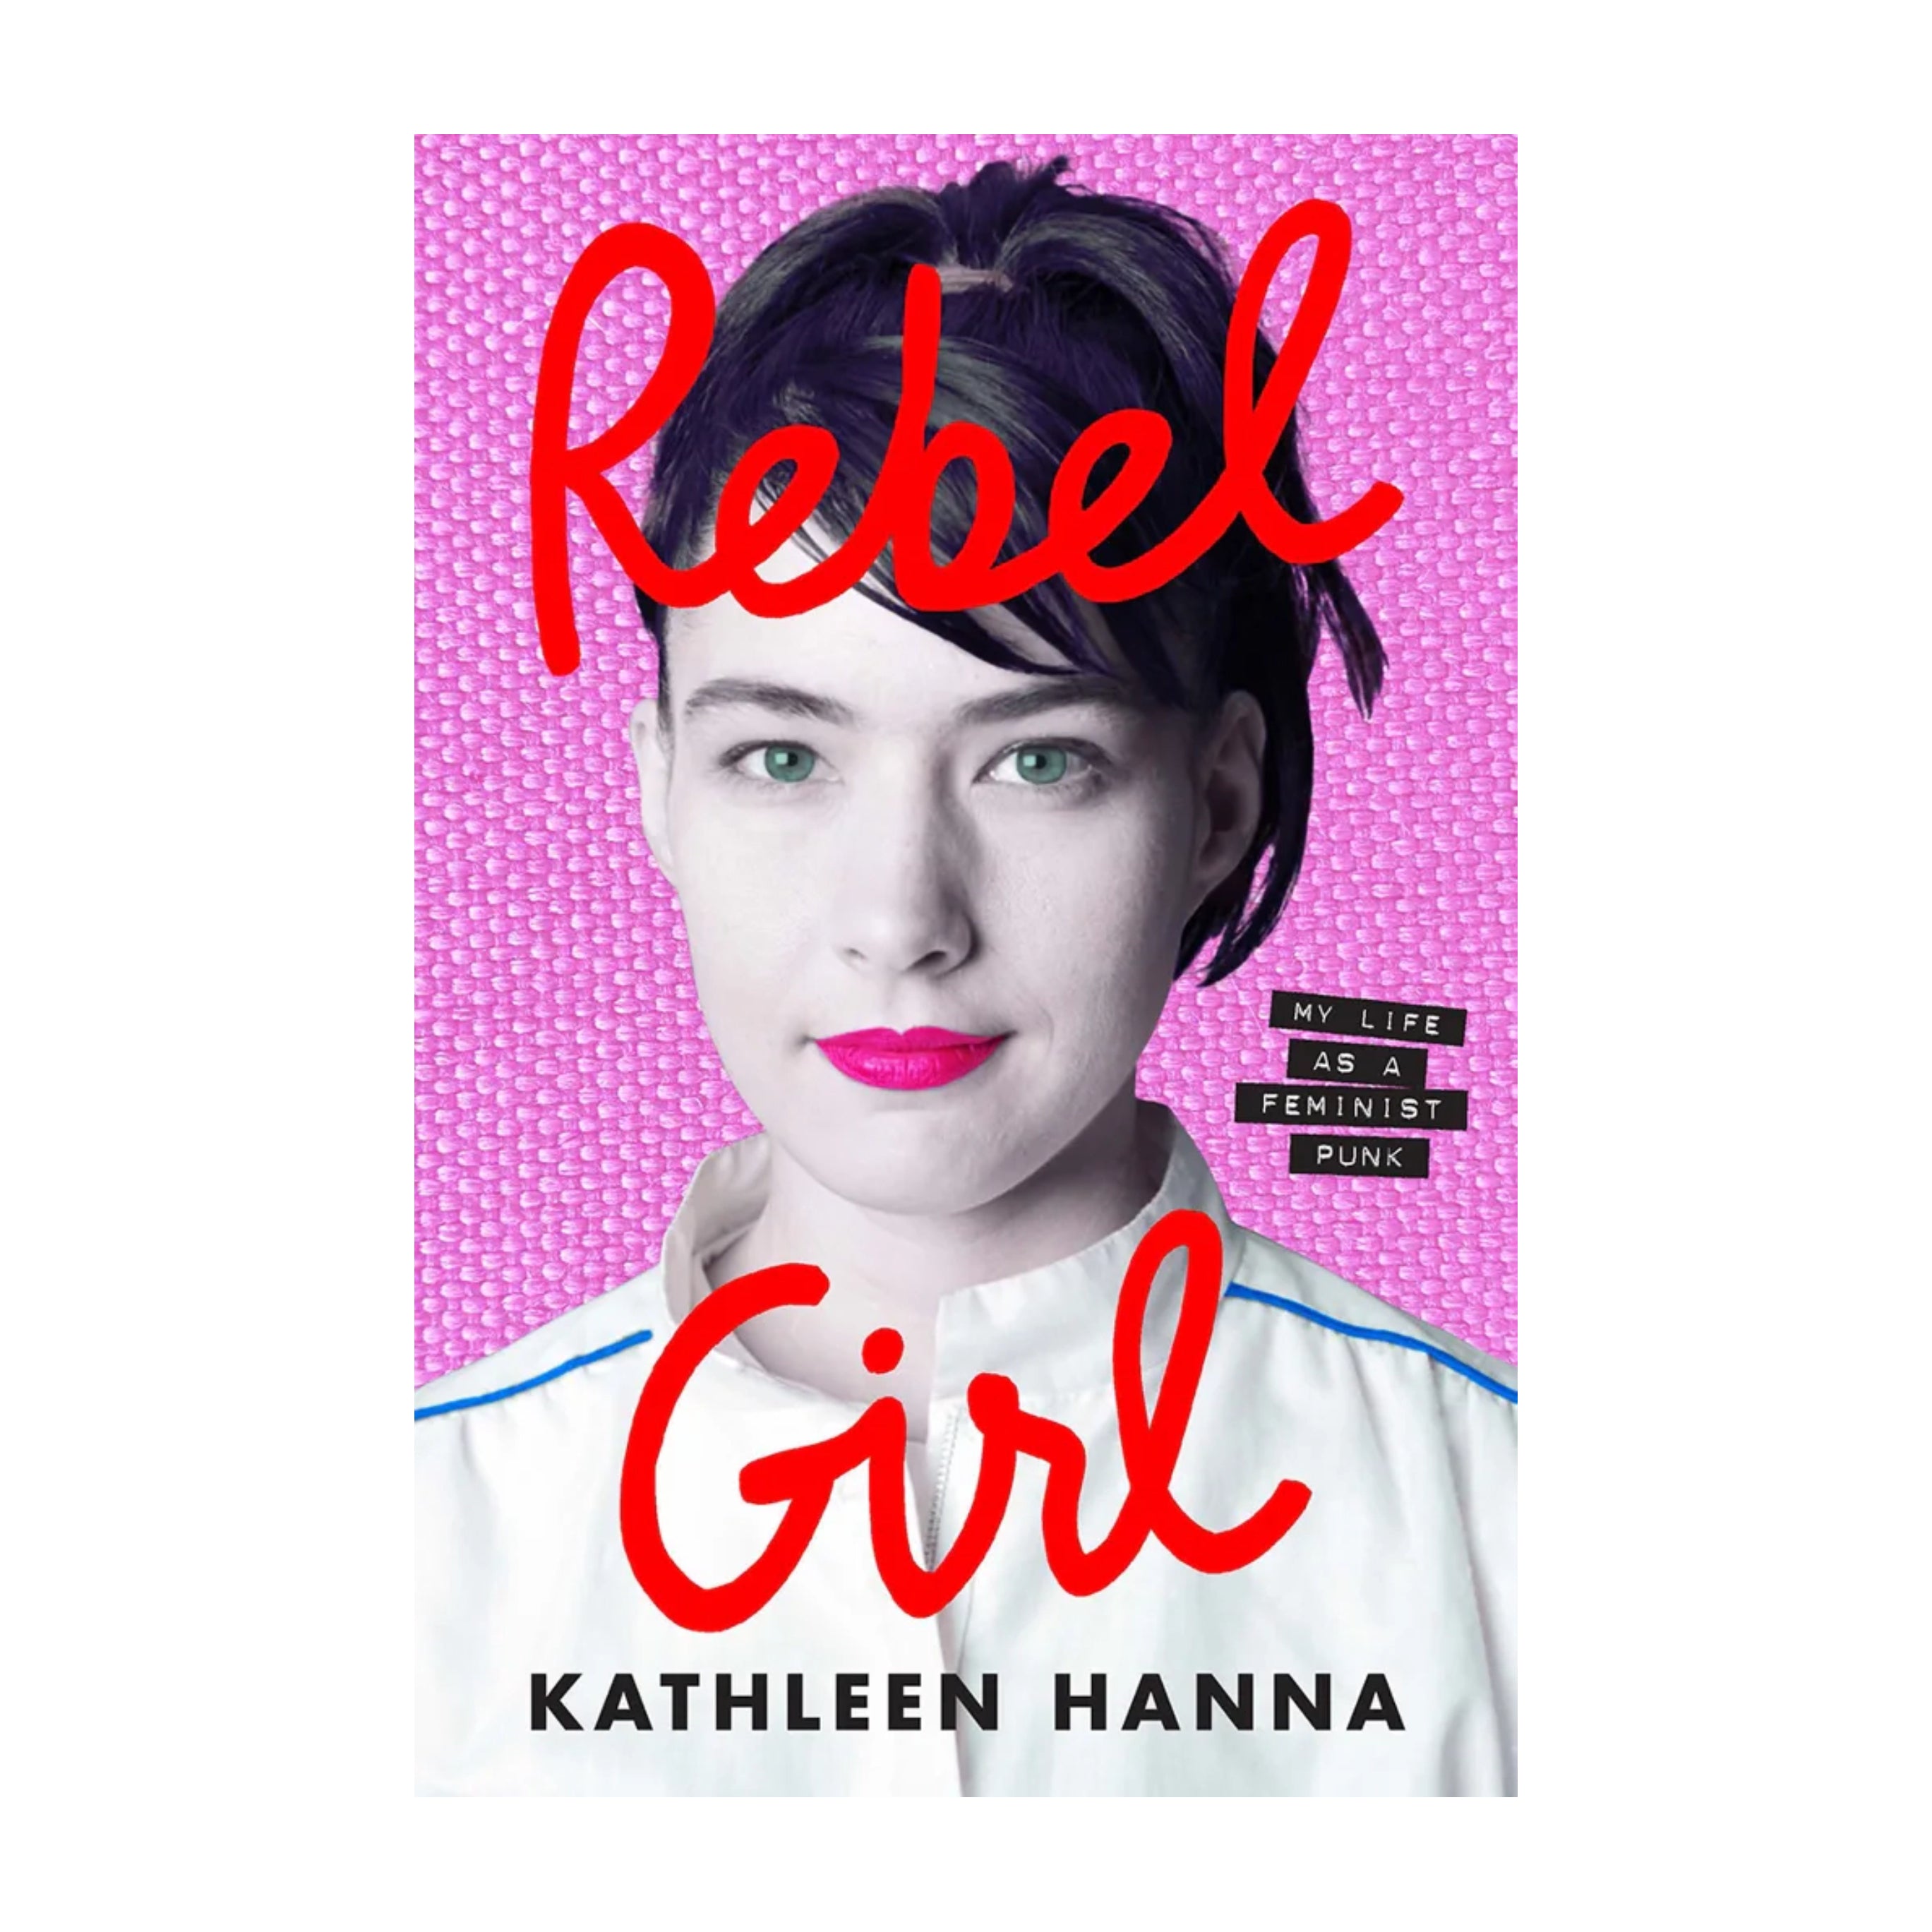 Kathleen Hanna - Rebel Girl - My Life as a Feminist Punk: Book + Signed Bookplate